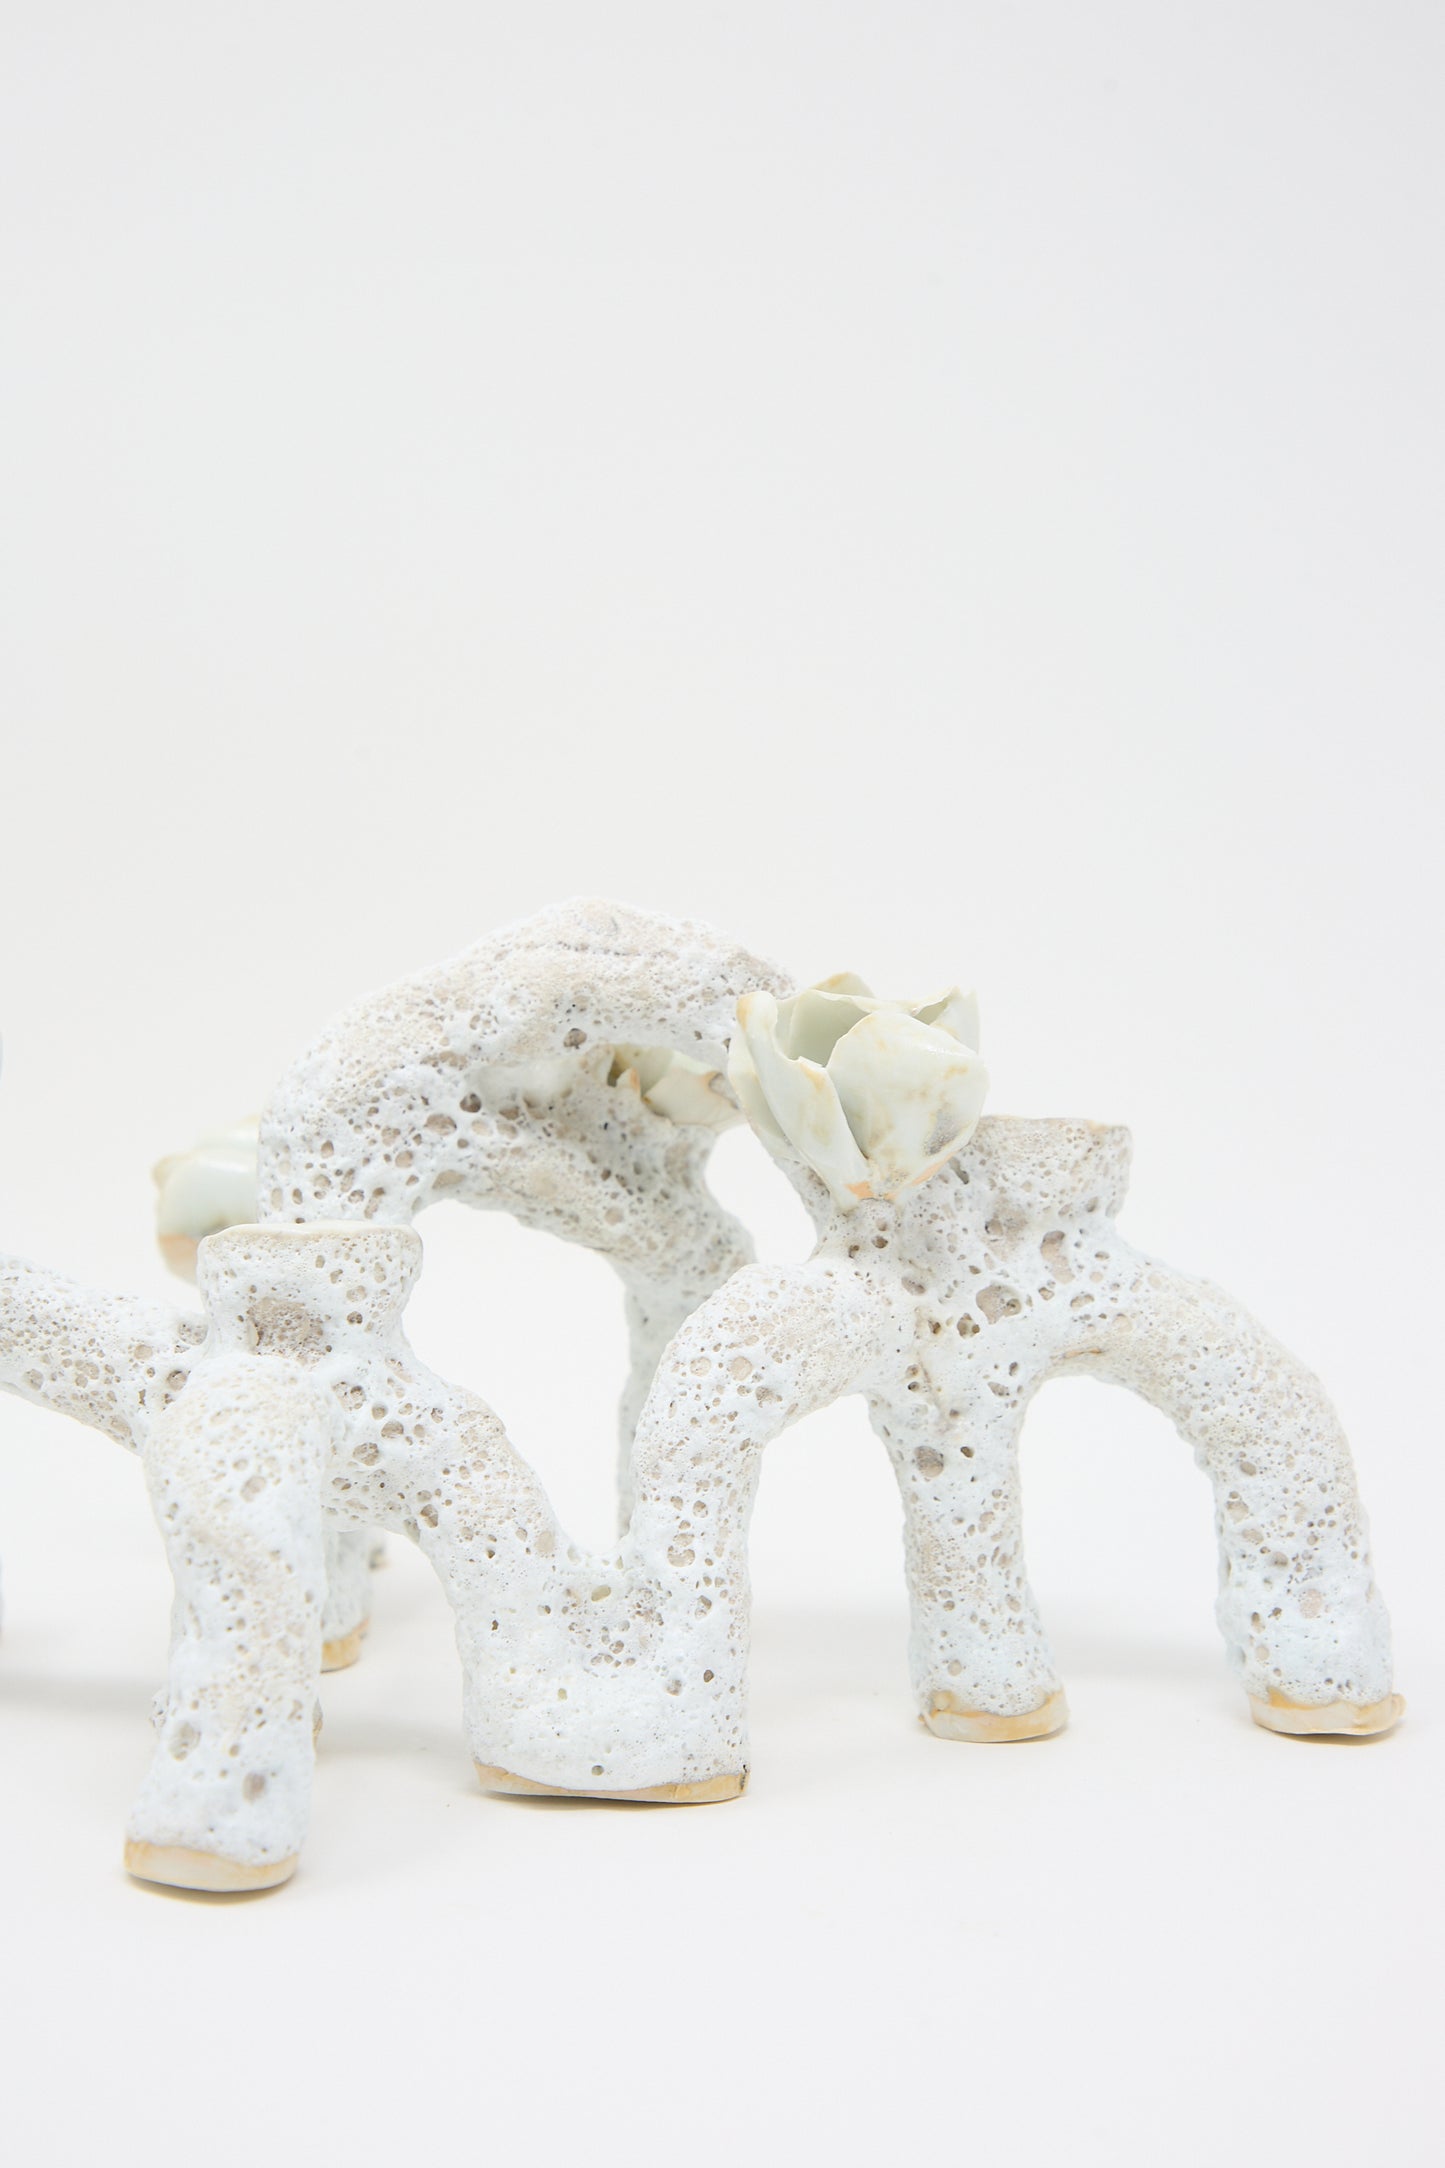 White, porous ceramic sculpture with an abstract, organic design featuring arch-like shapes and small, protruding elements. One of the arches has a flower-like detail on top, resembling luminescent petals. This hand-built piece stands against a plain white background. The **Blooming Arches Candle Holder** by **Dear You** beautifully accentuates any space with its intricate craftsmanship.